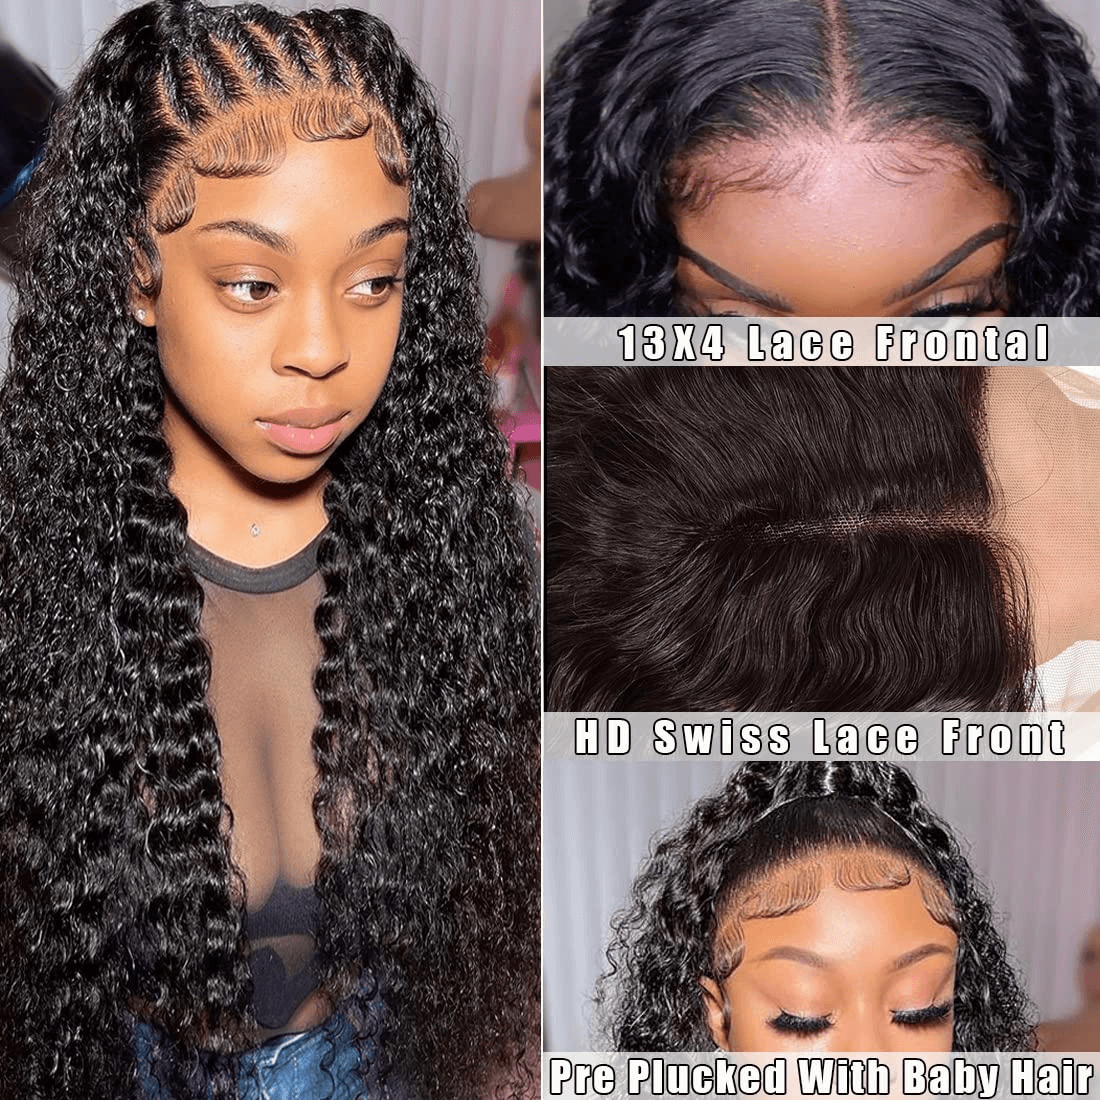 Wesface Water Wave Lace Front Wigs Human Hair Wigs for Women 13x4 Glueless Lace Frontal Wigs Human Hair Pre Plucked with Baby Hair Wet and Wavy Wigs Human Hair 180% Density Natural Color